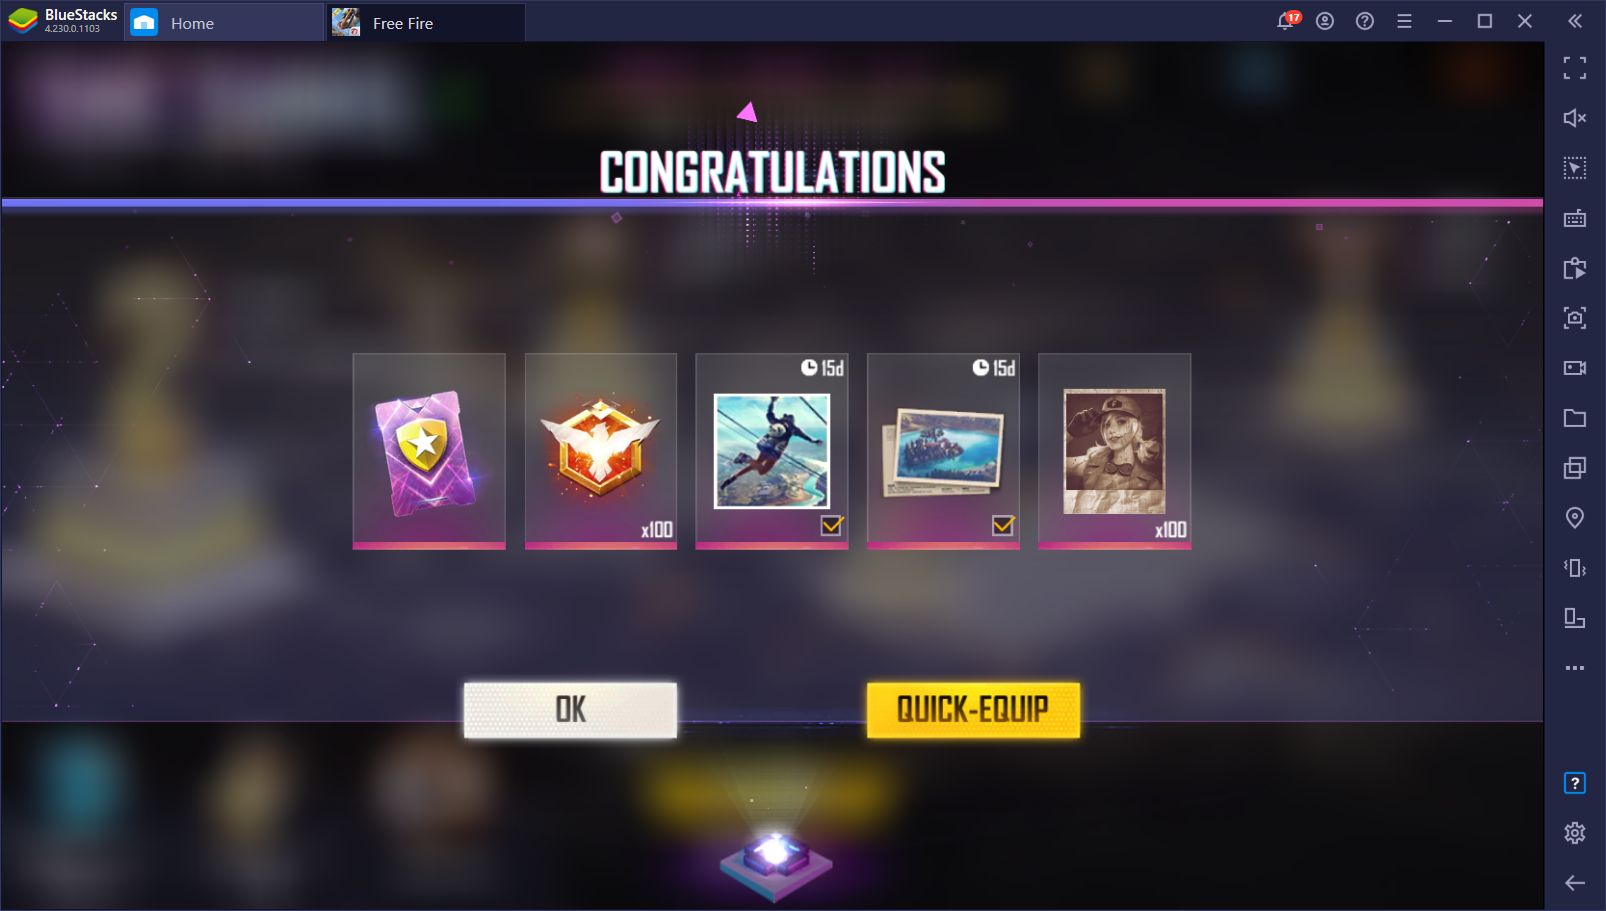 Free Fire 3rd Anniversary: Missions and rewards explained